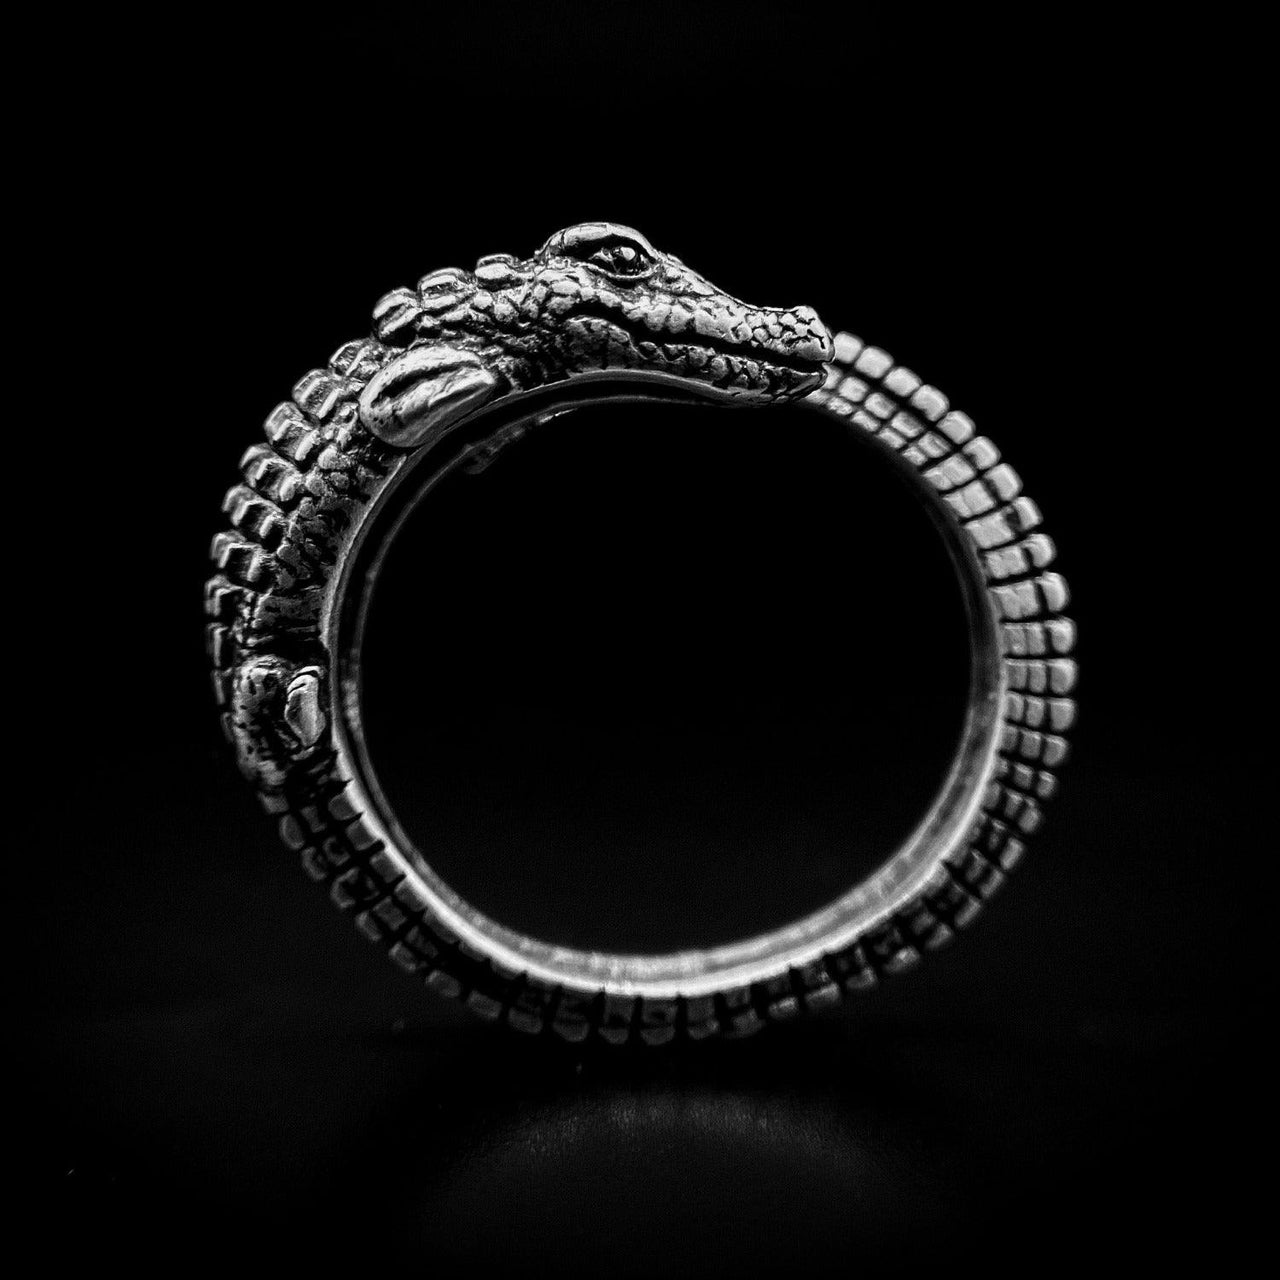 Crocodile ring on a black background by Black Feather Design